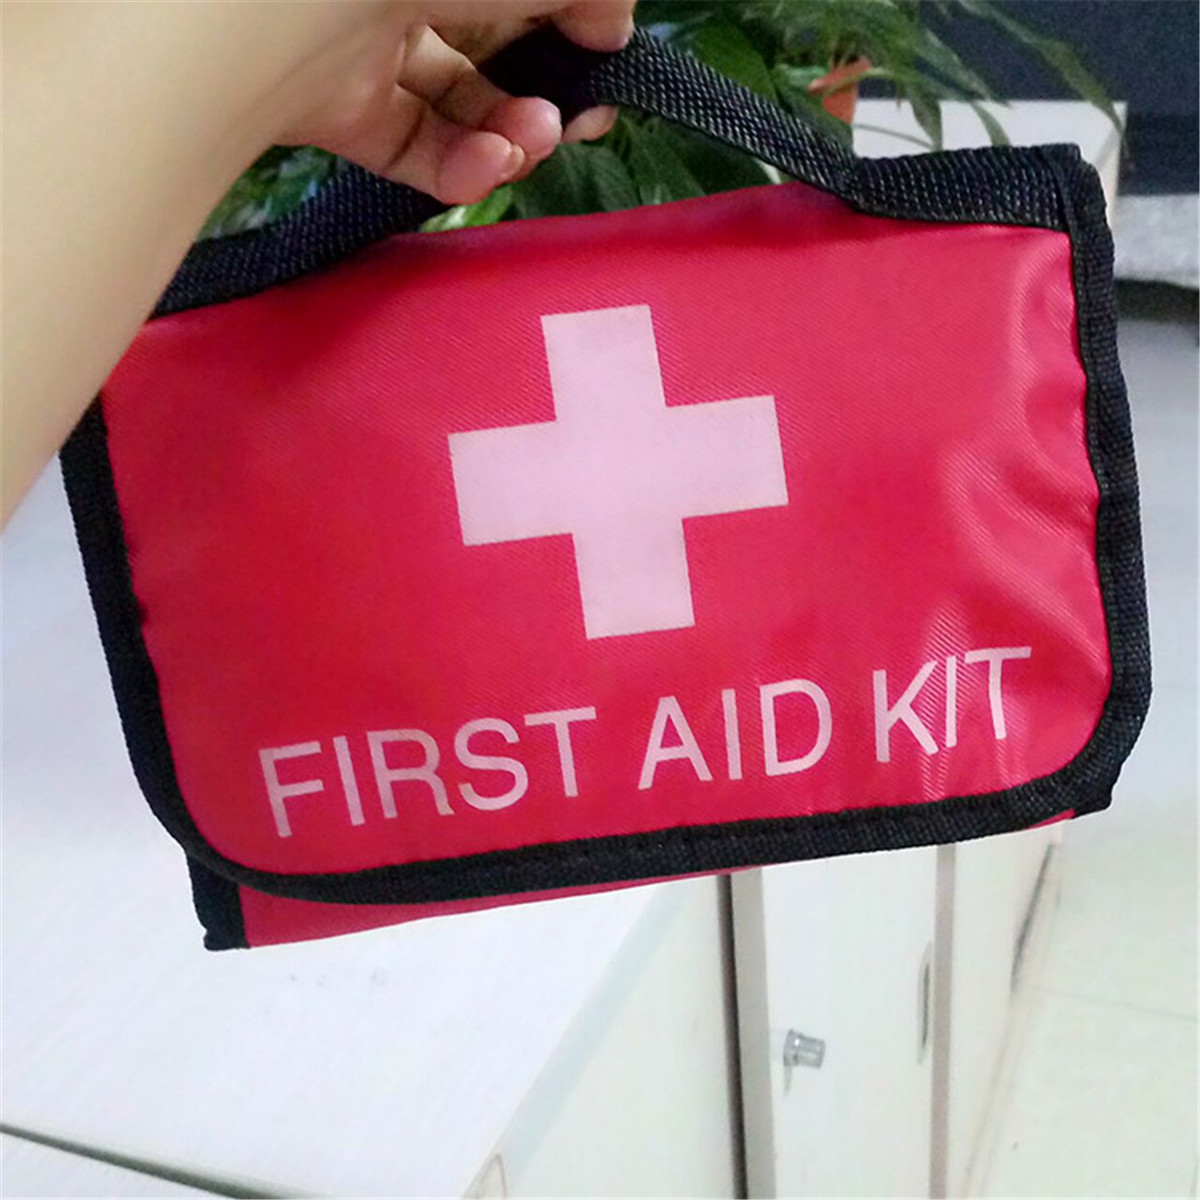 Outdoor-Portable-First-Aid-Kit-Medical-Storage-Bag-Waterproof-Car-Carrying-Household-Emergency-Kit-T-1757235-2